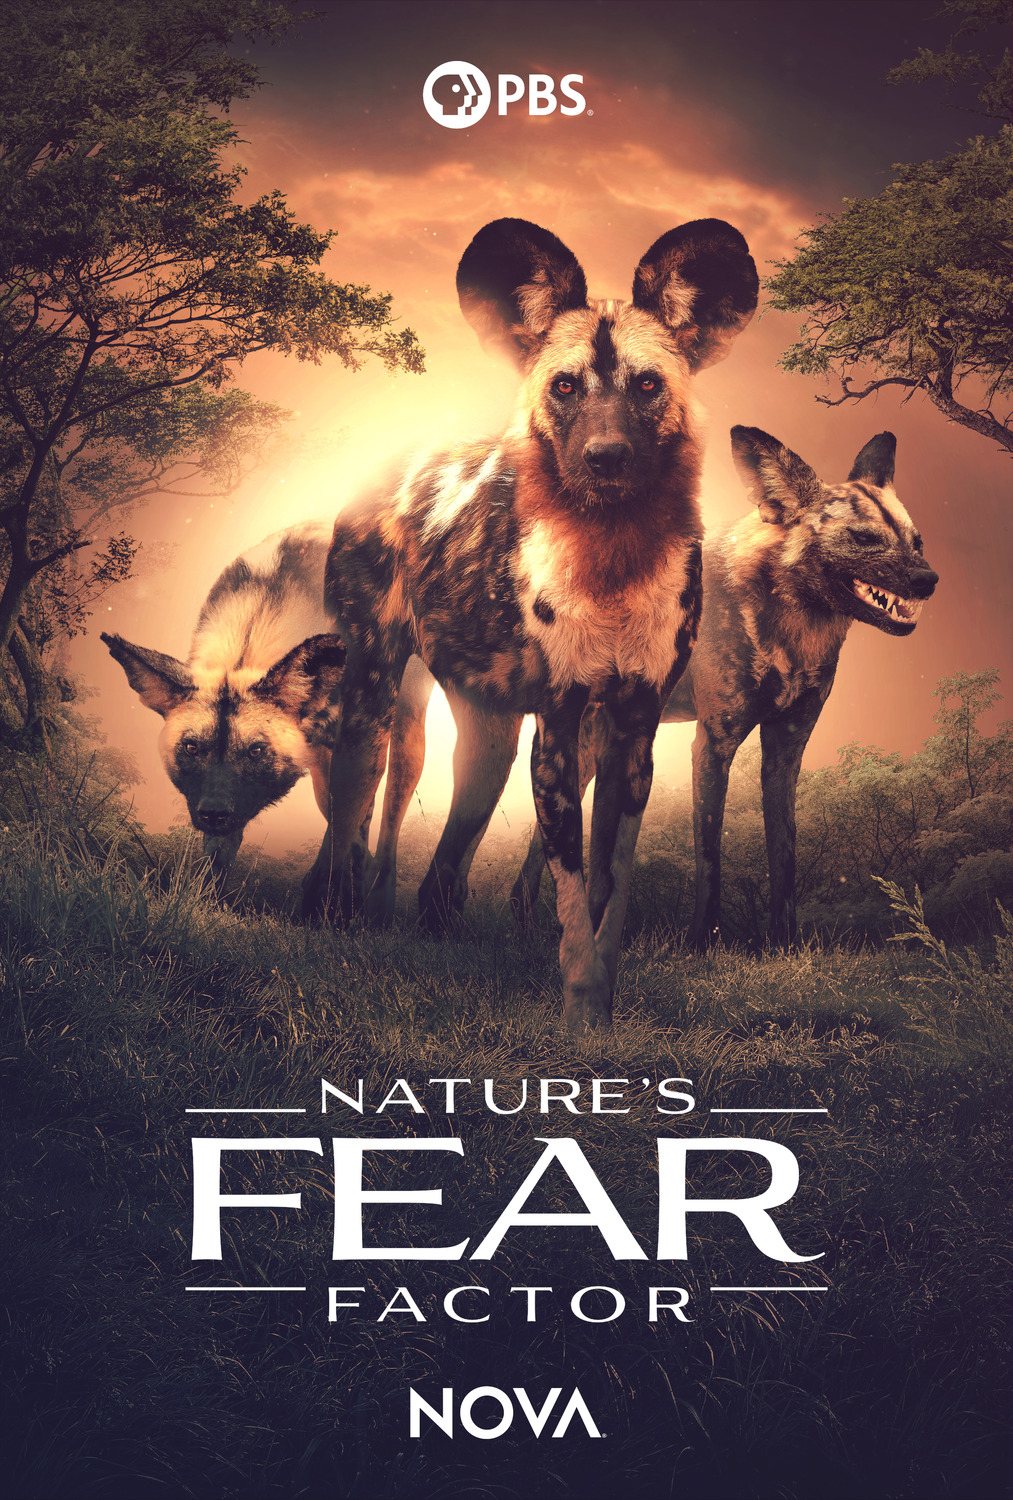 Extra Large TV Poster Image for Nature's Fear Factor 